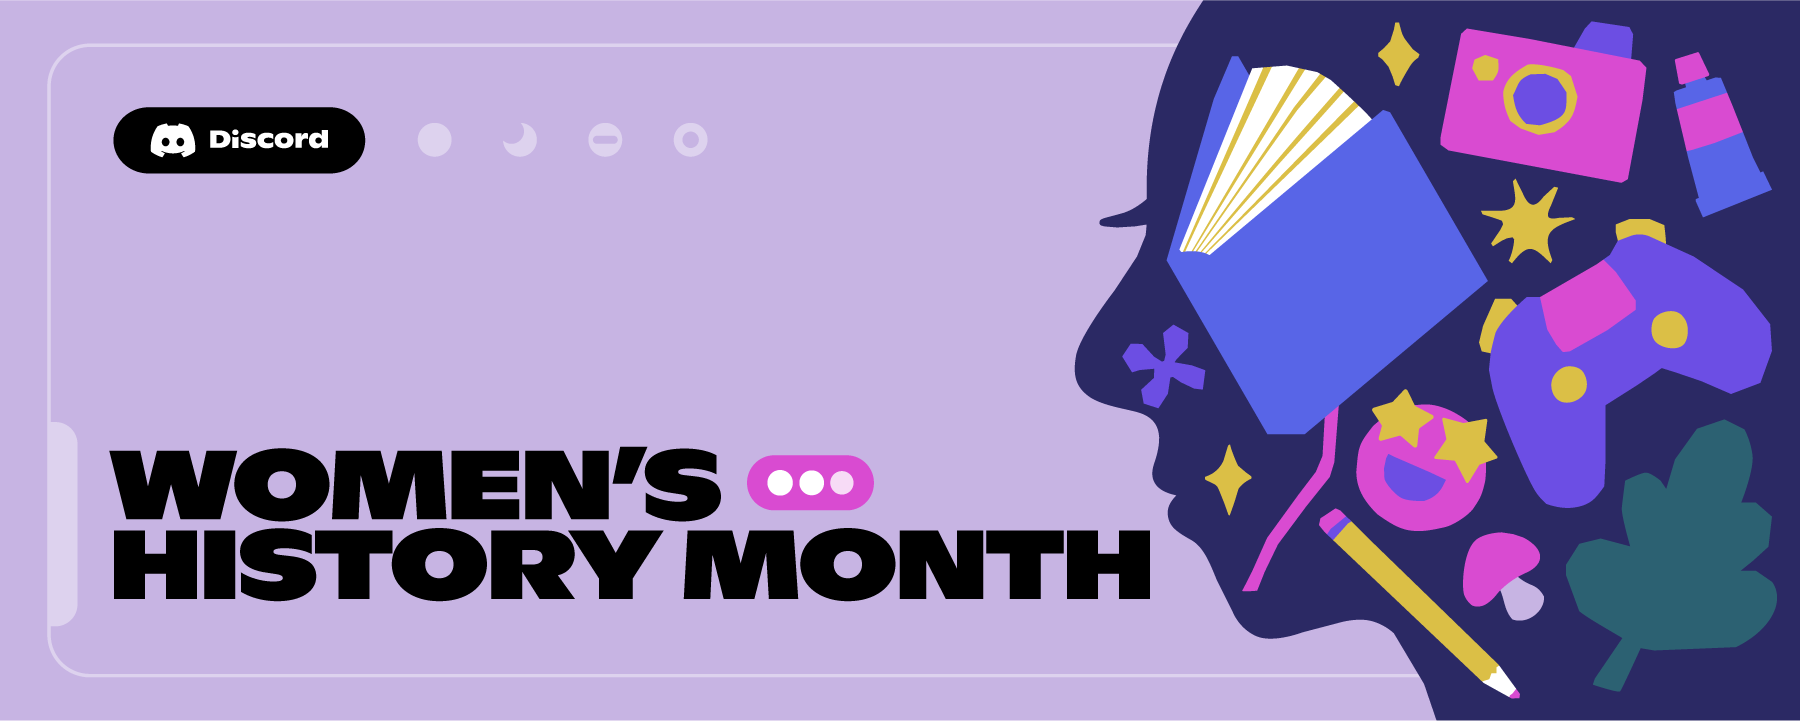 A silhouette of a feminine figure overlayed with imagery of books, photography, gaming controllers, plants, and artistic tools. The phrase “Women's History Month” is shown next to the silhouette. 